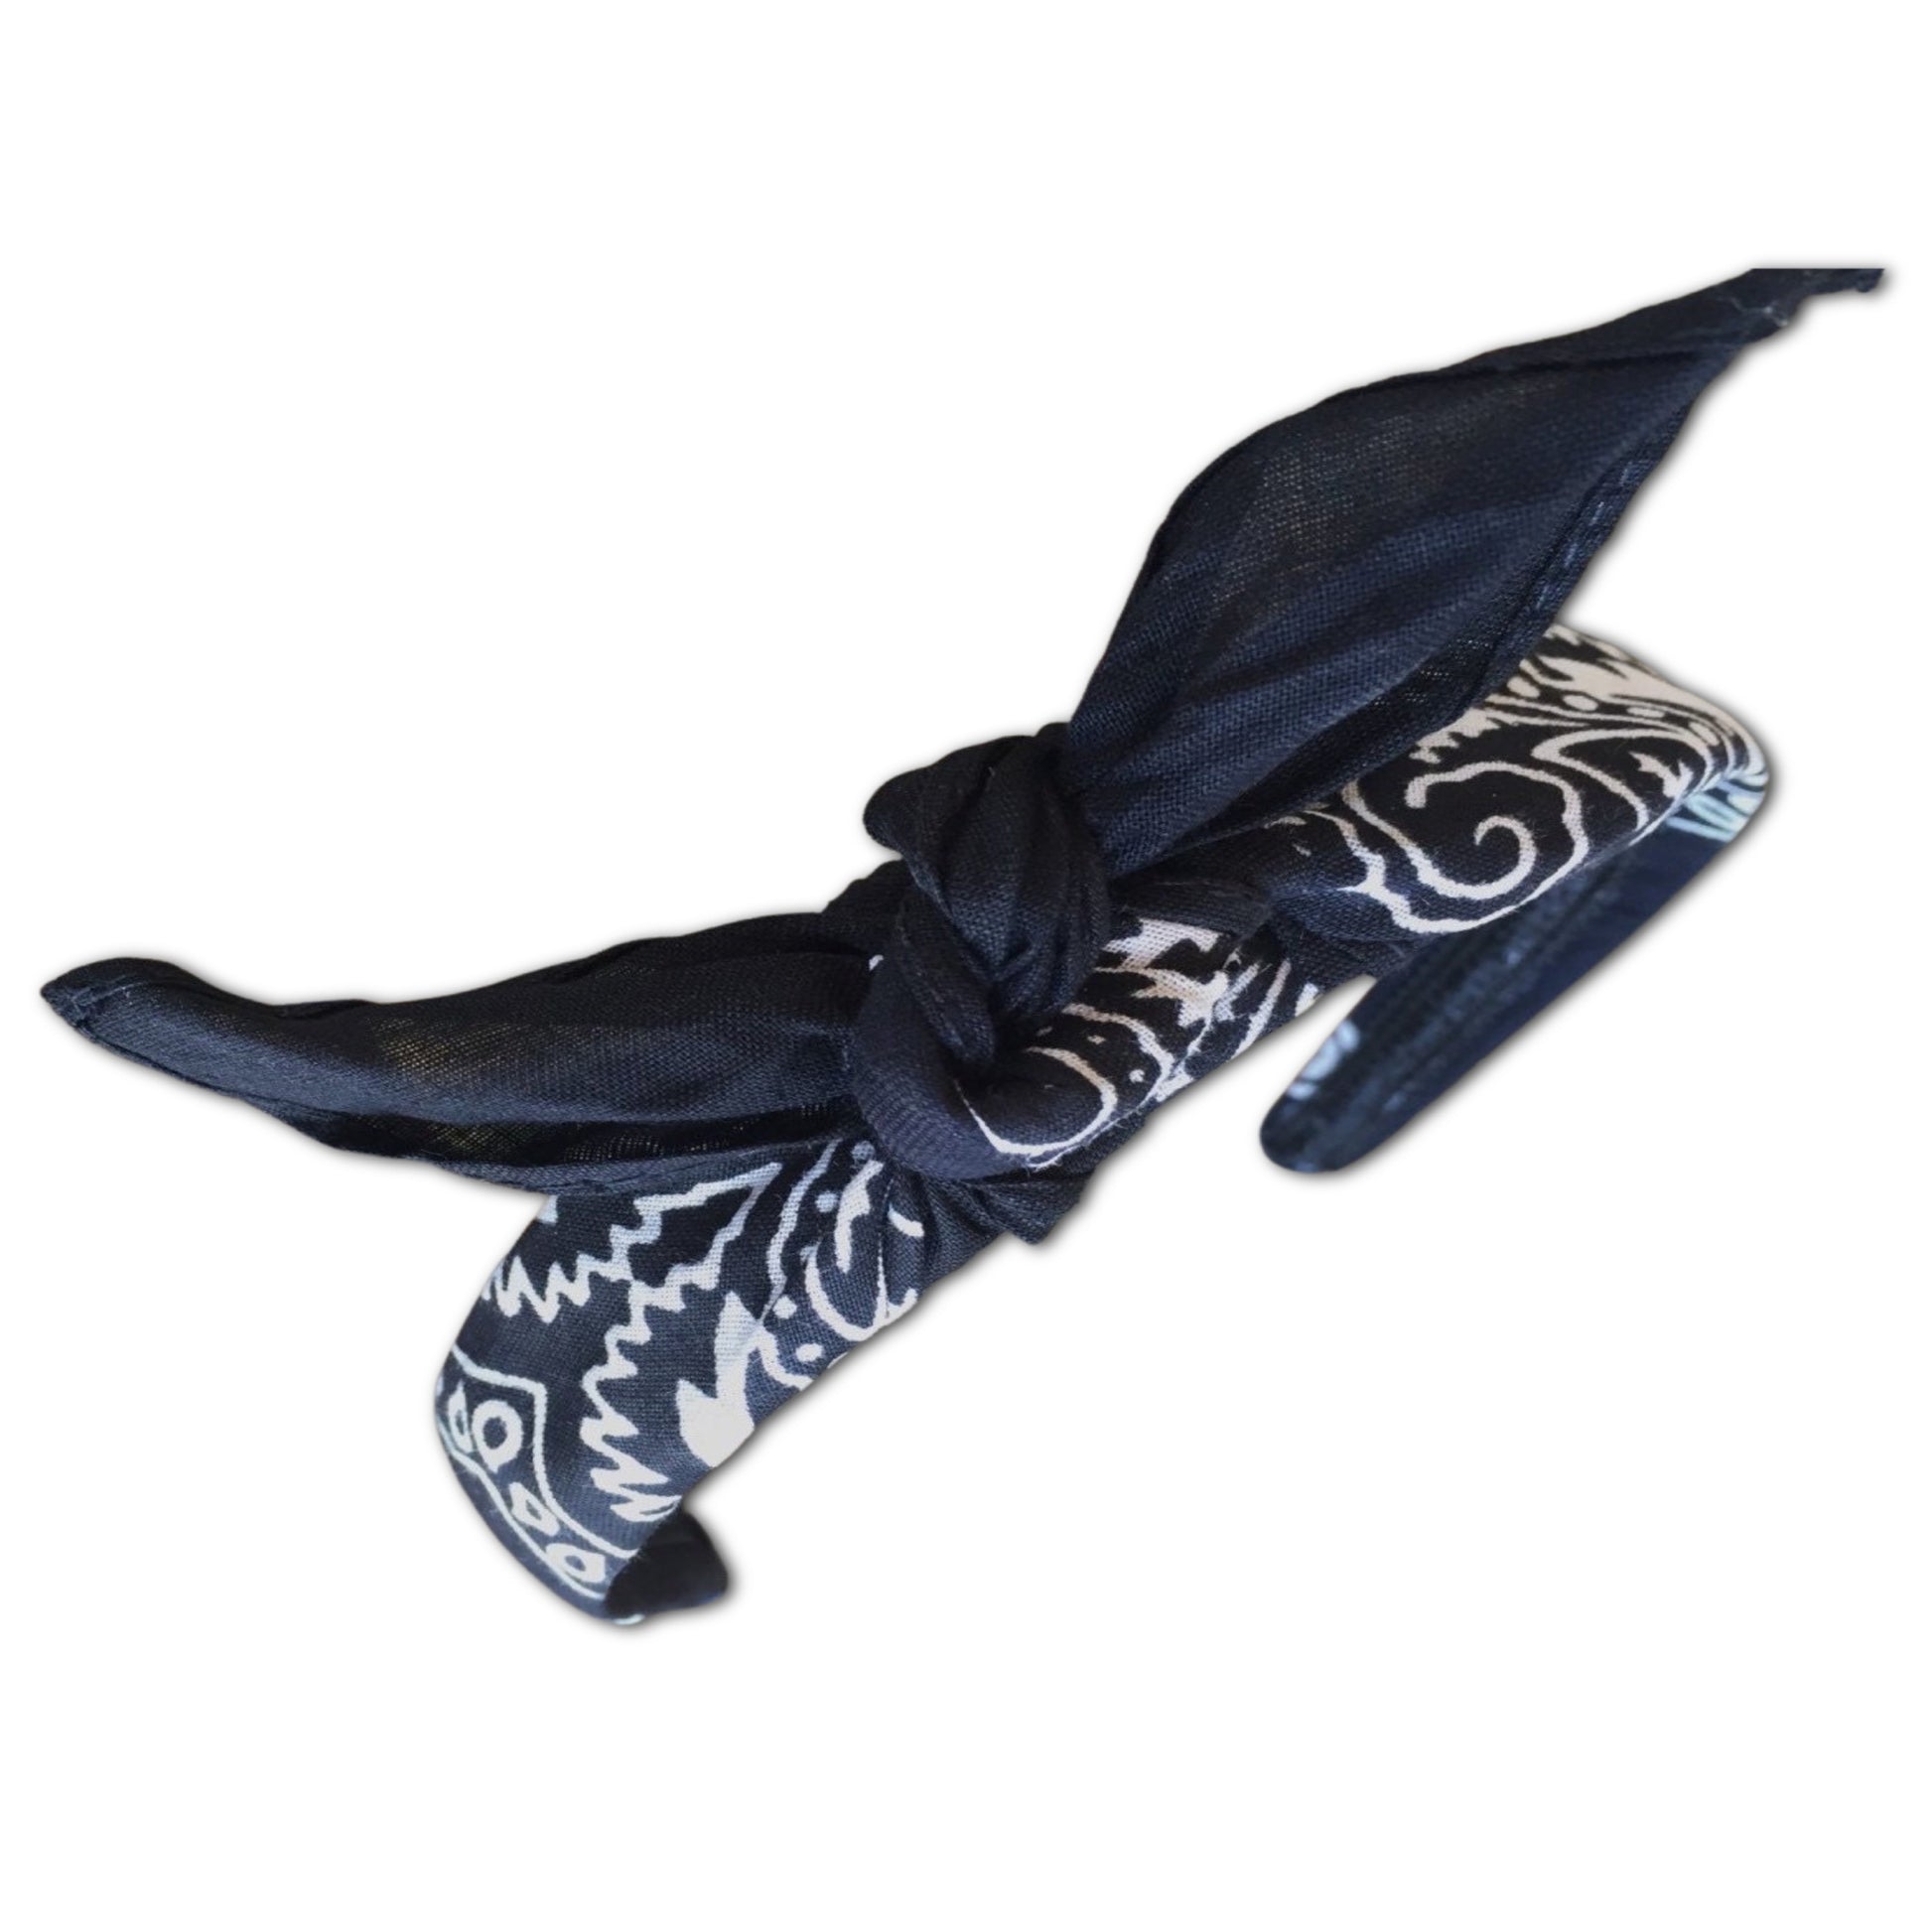 Black paisley kerchief bandana is wrapped around a plastic headband and tied in a knot. designed to not slip